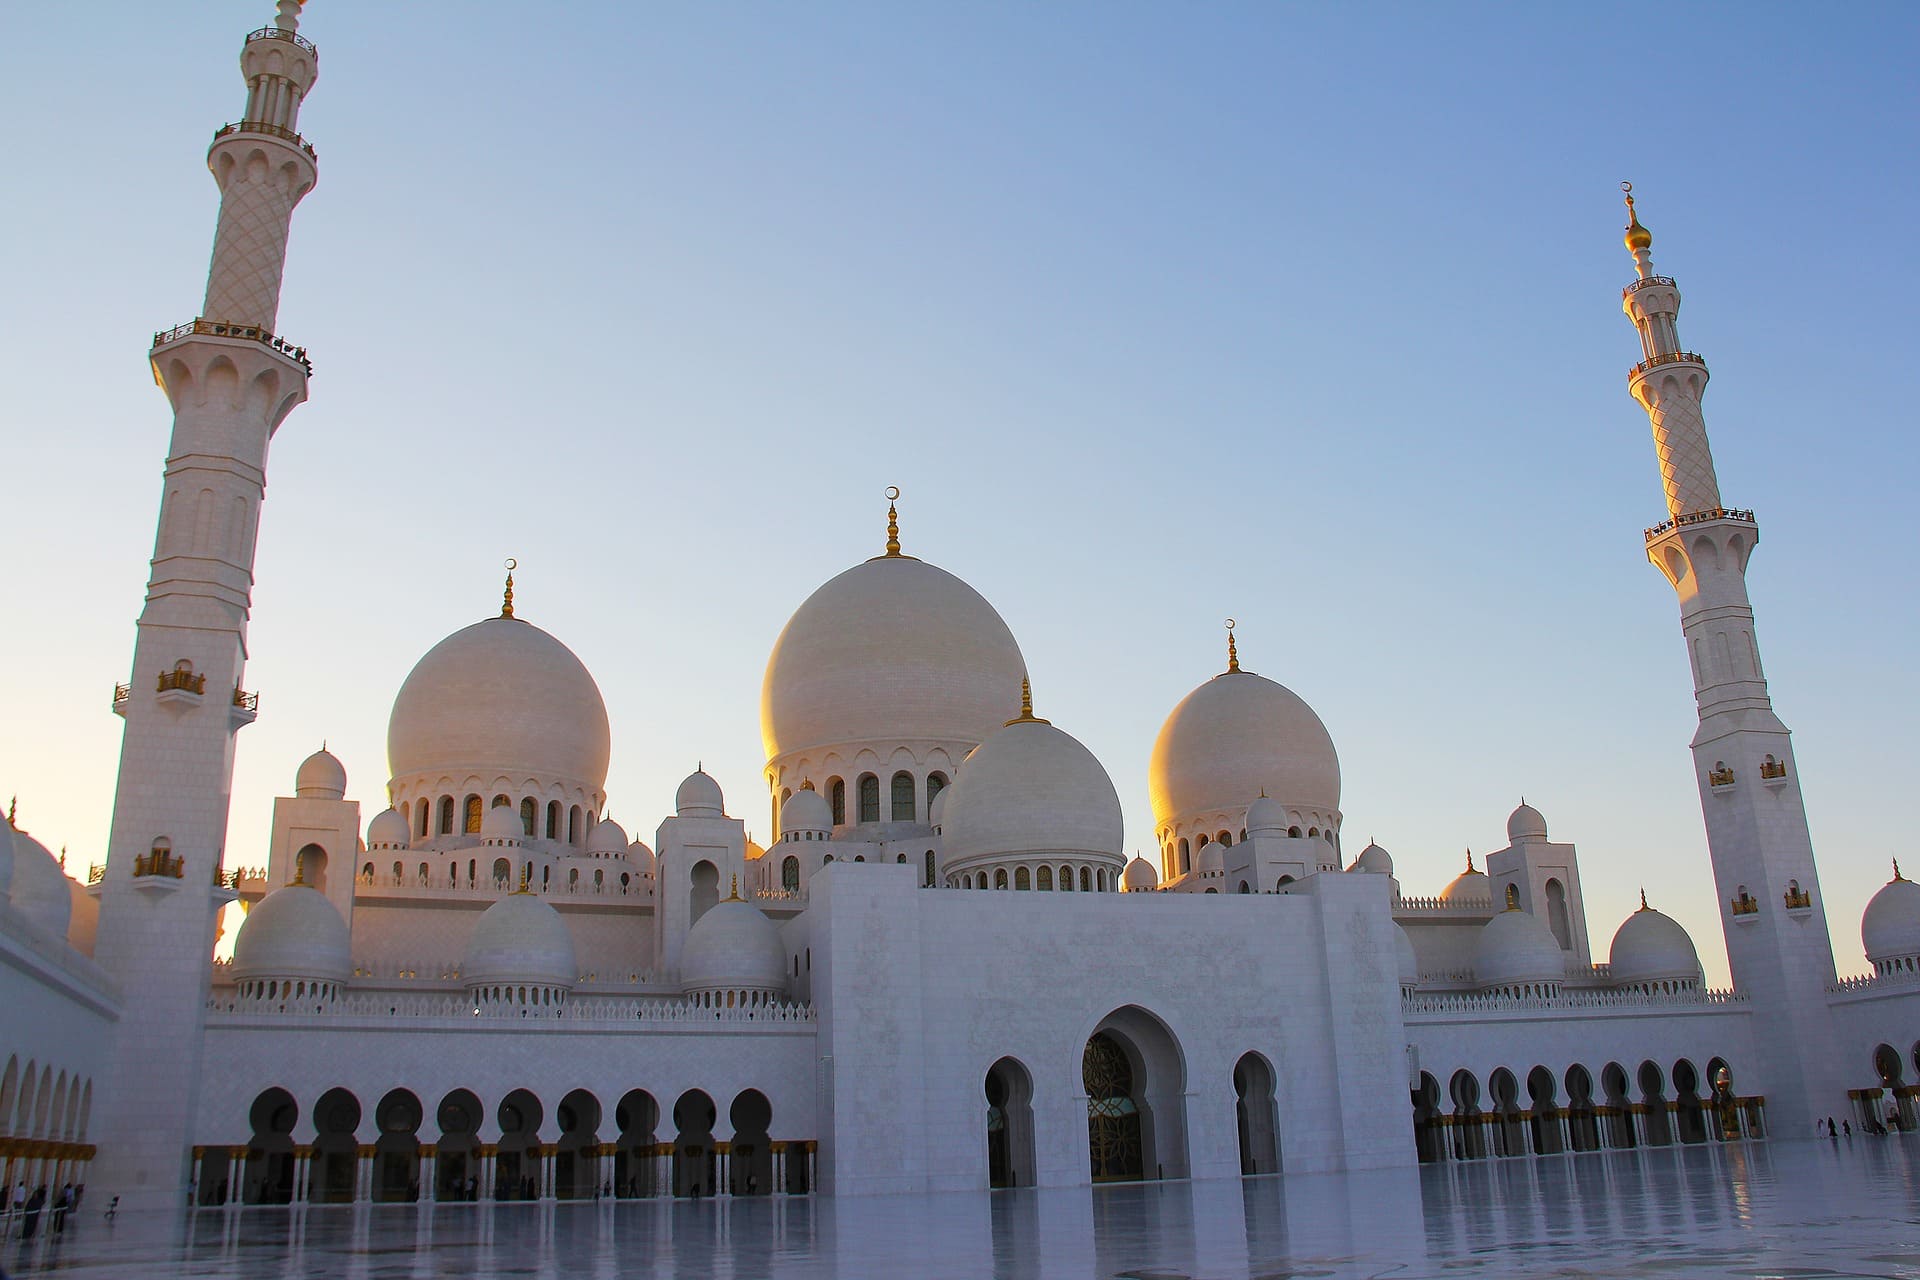 Sheikh Zayed Grand Mosque And Louvre Museum Abu Dhabi In A Day From Dubai